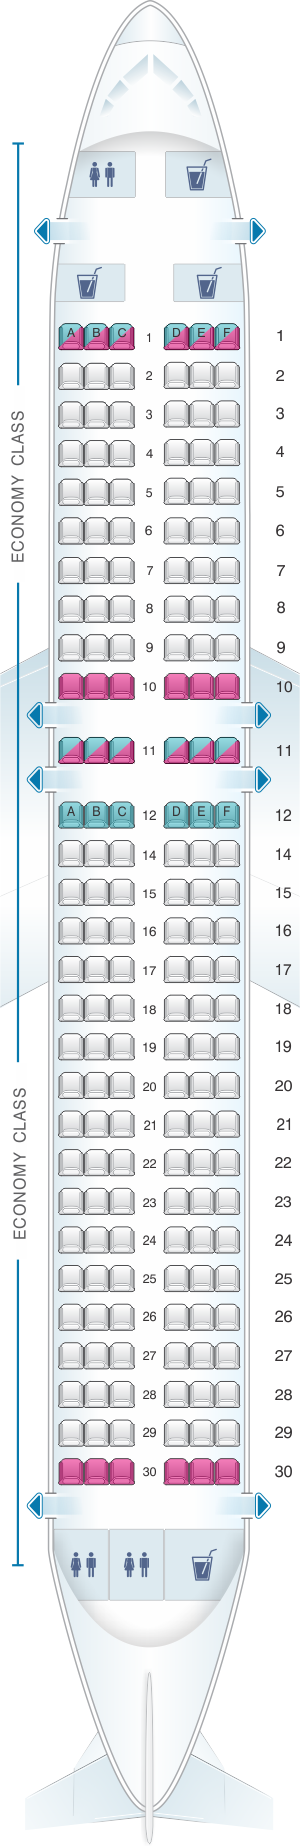 Seat map for Scandinavian Airlines (SAS) Airbus A320neo